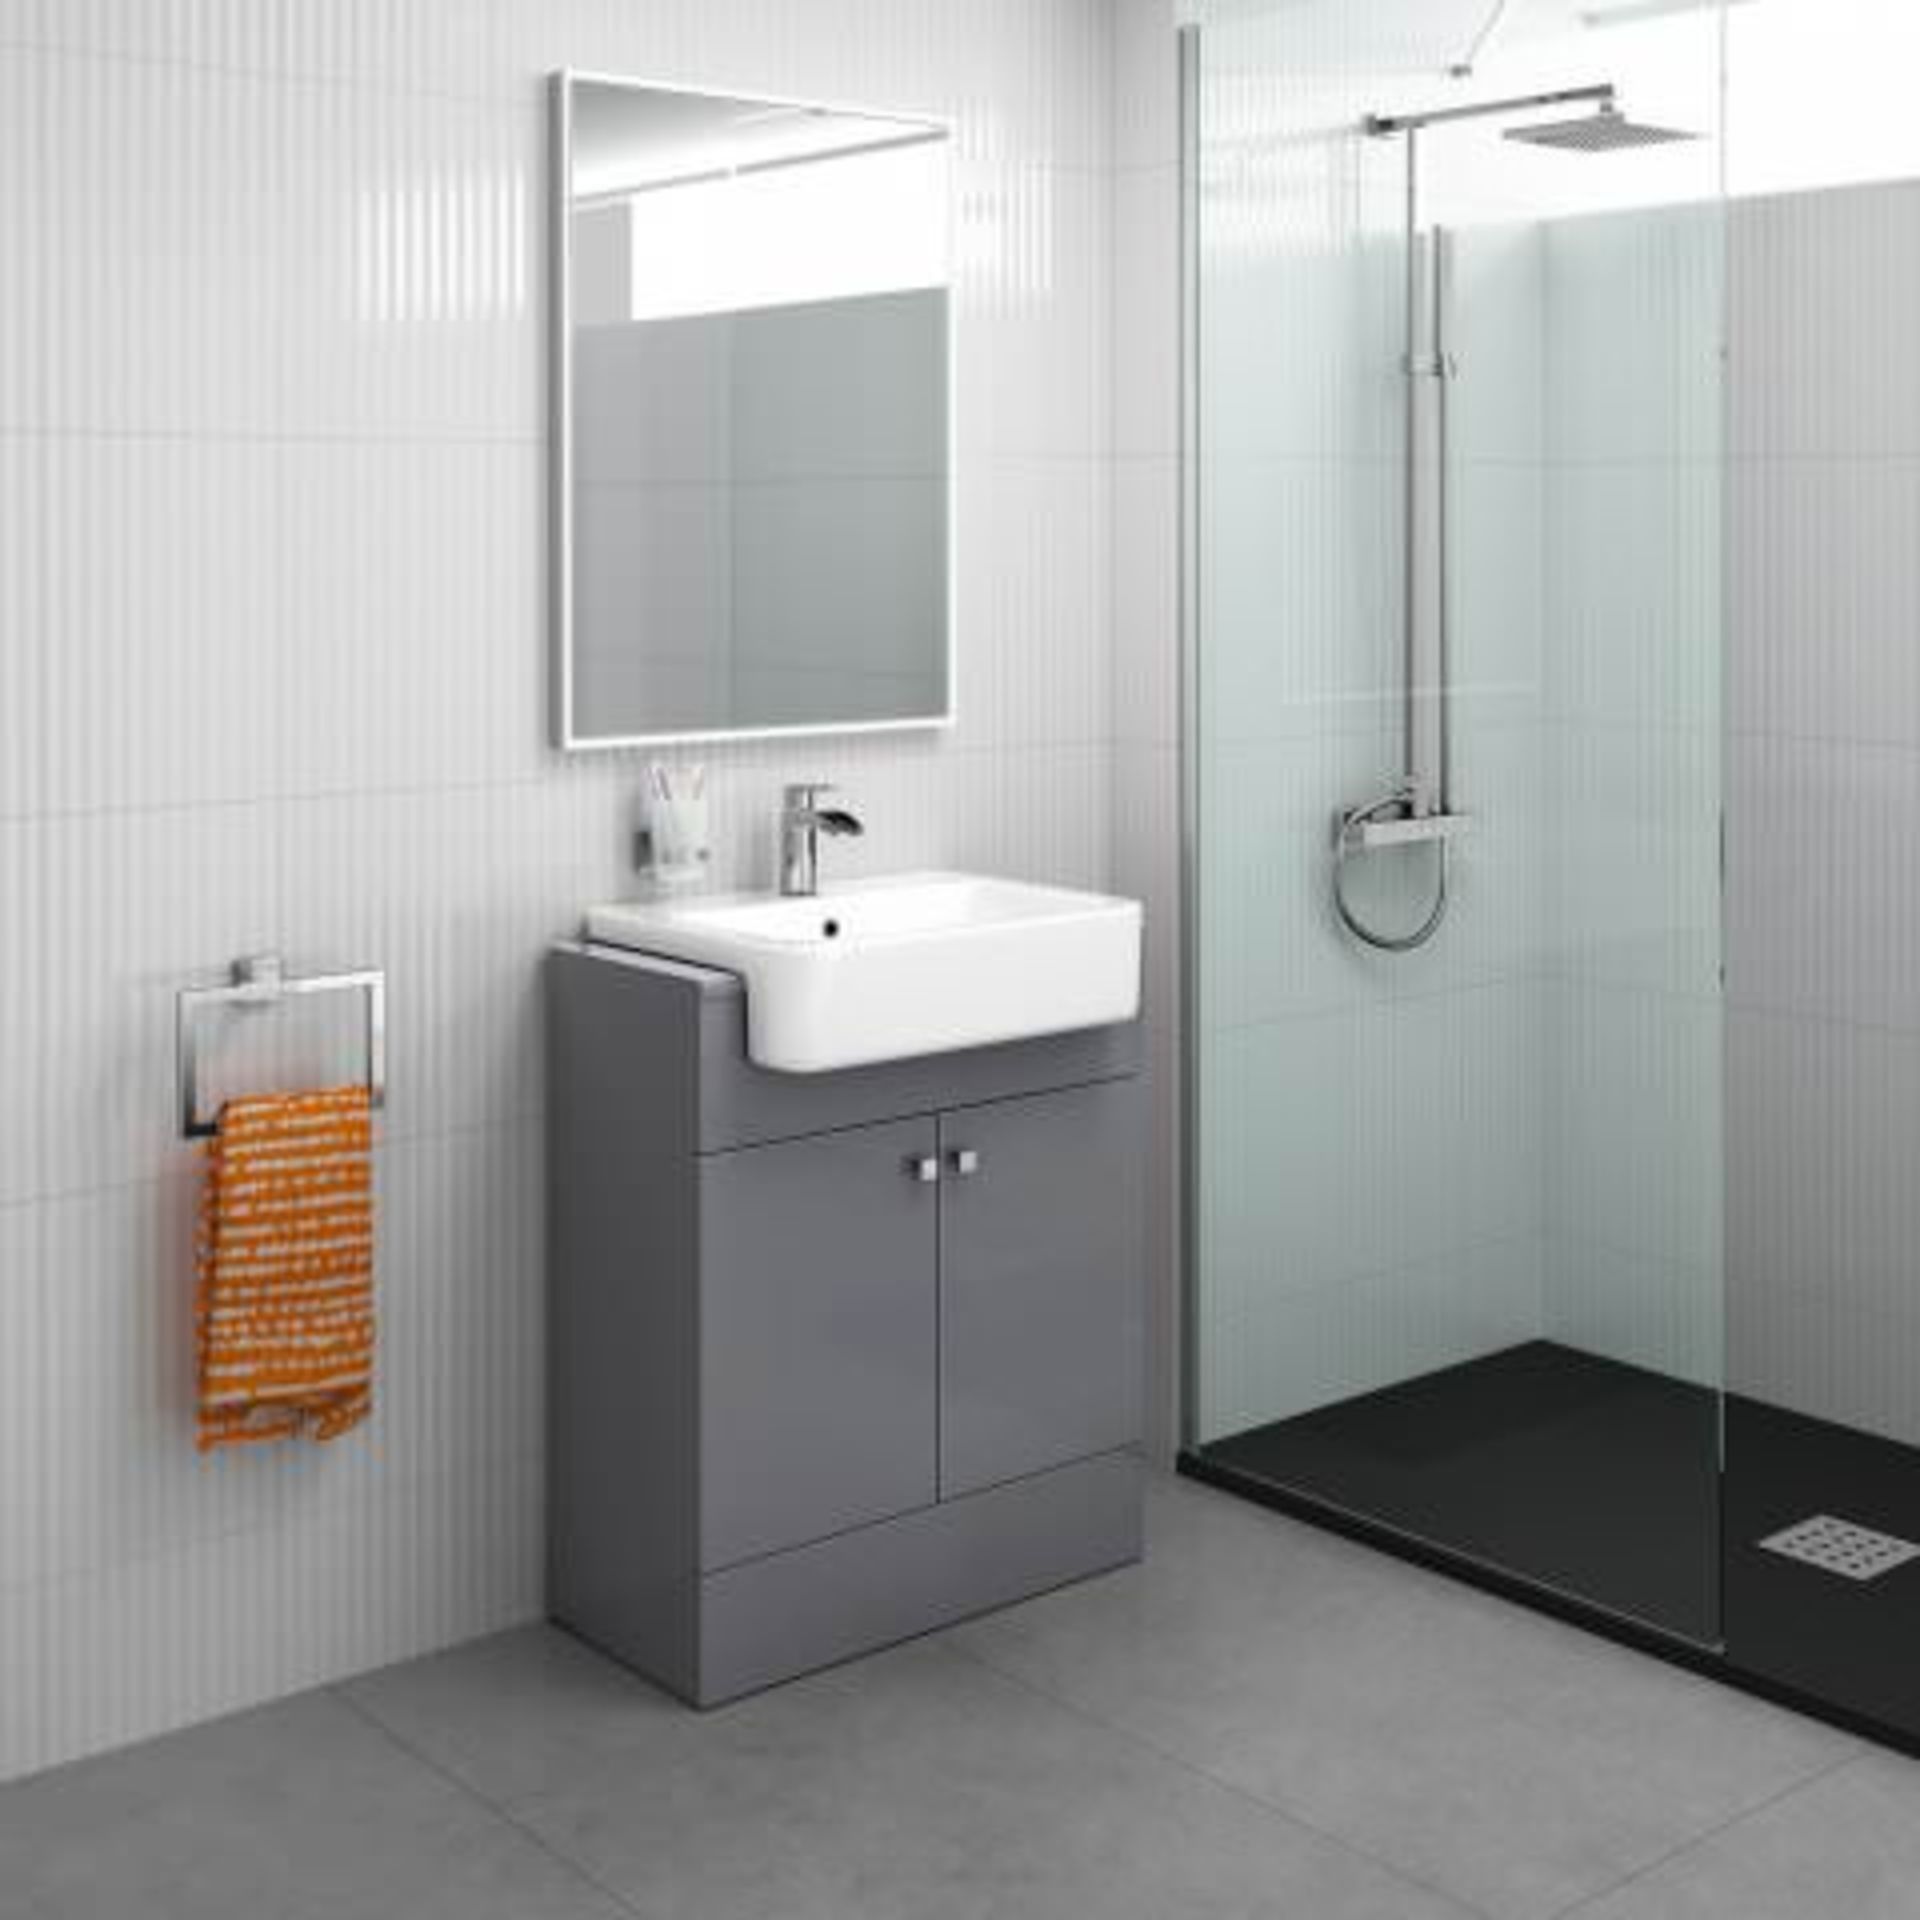 NEW & BOXED 660mm Harper Gloss Grey Basin Vanity Unit - Floor Standing. RRP £749.99.COMES COMPLETE - Image 2 of 2